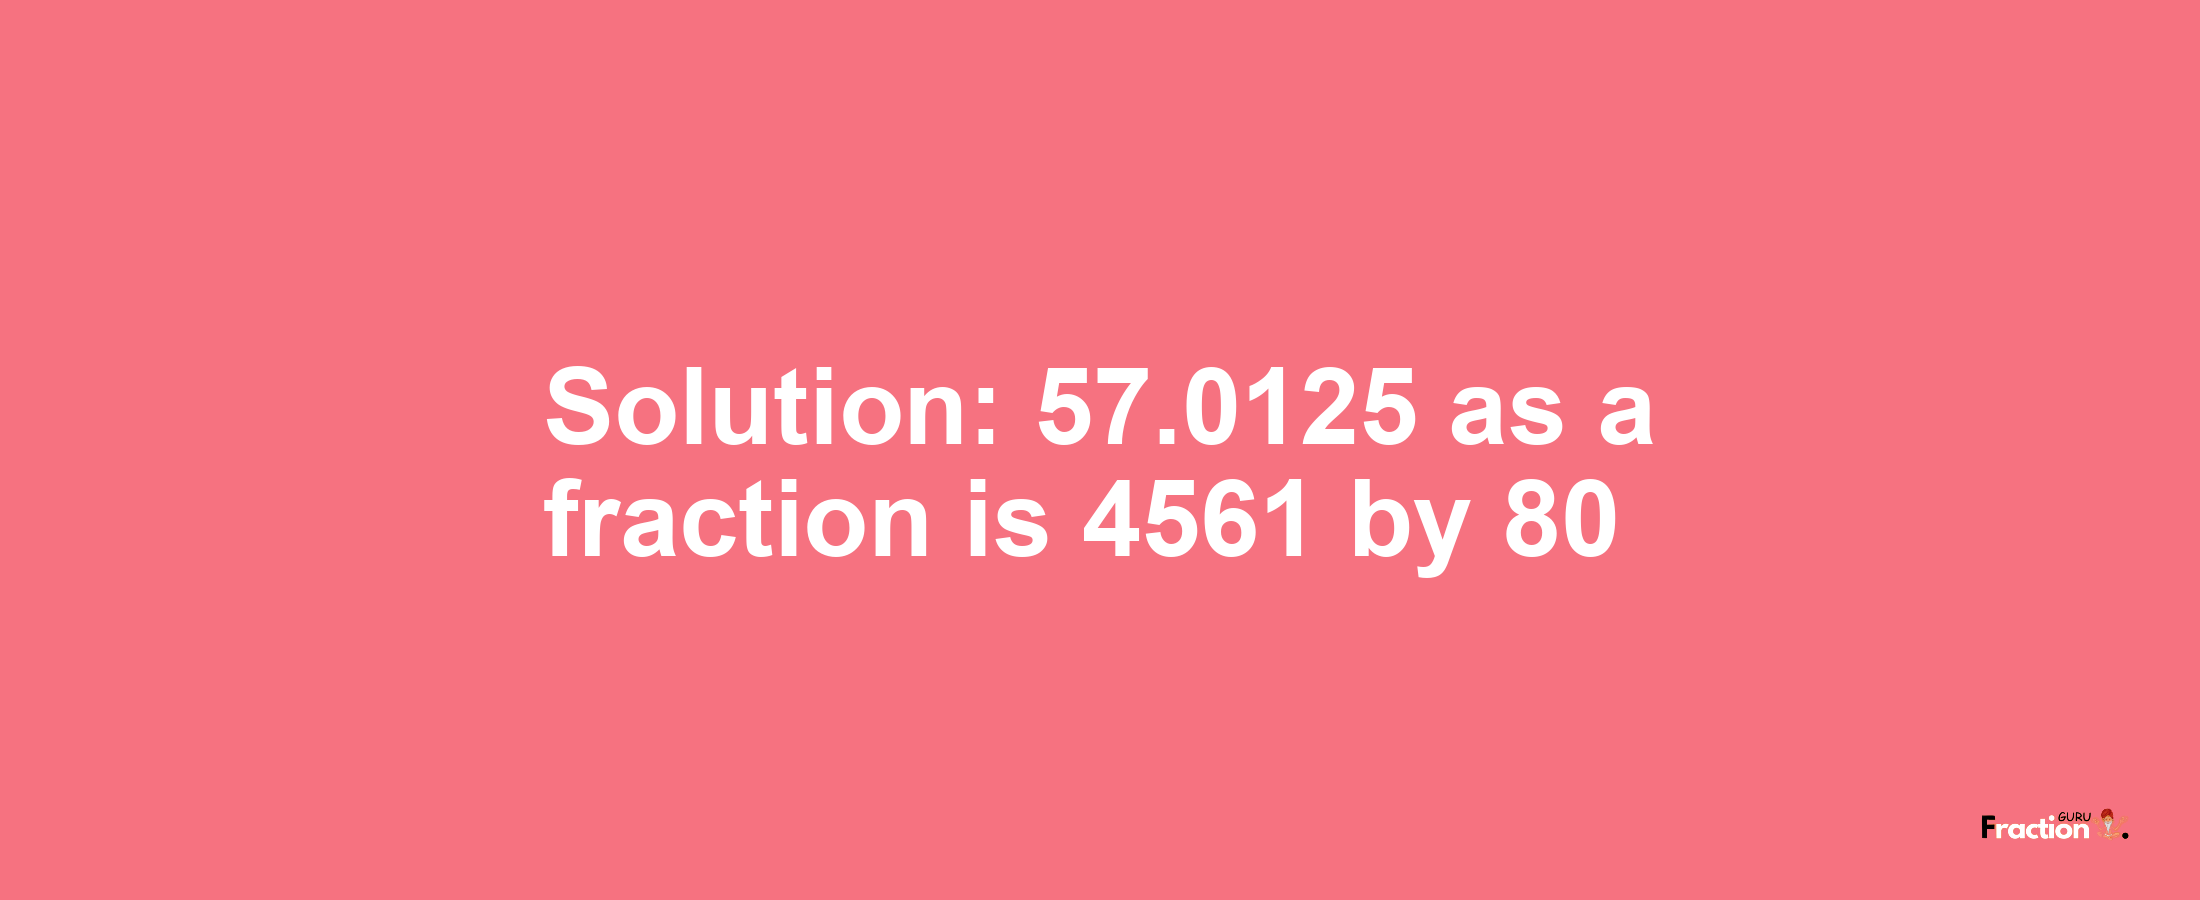 Solution:57.0125 as a fraction is 4561/80